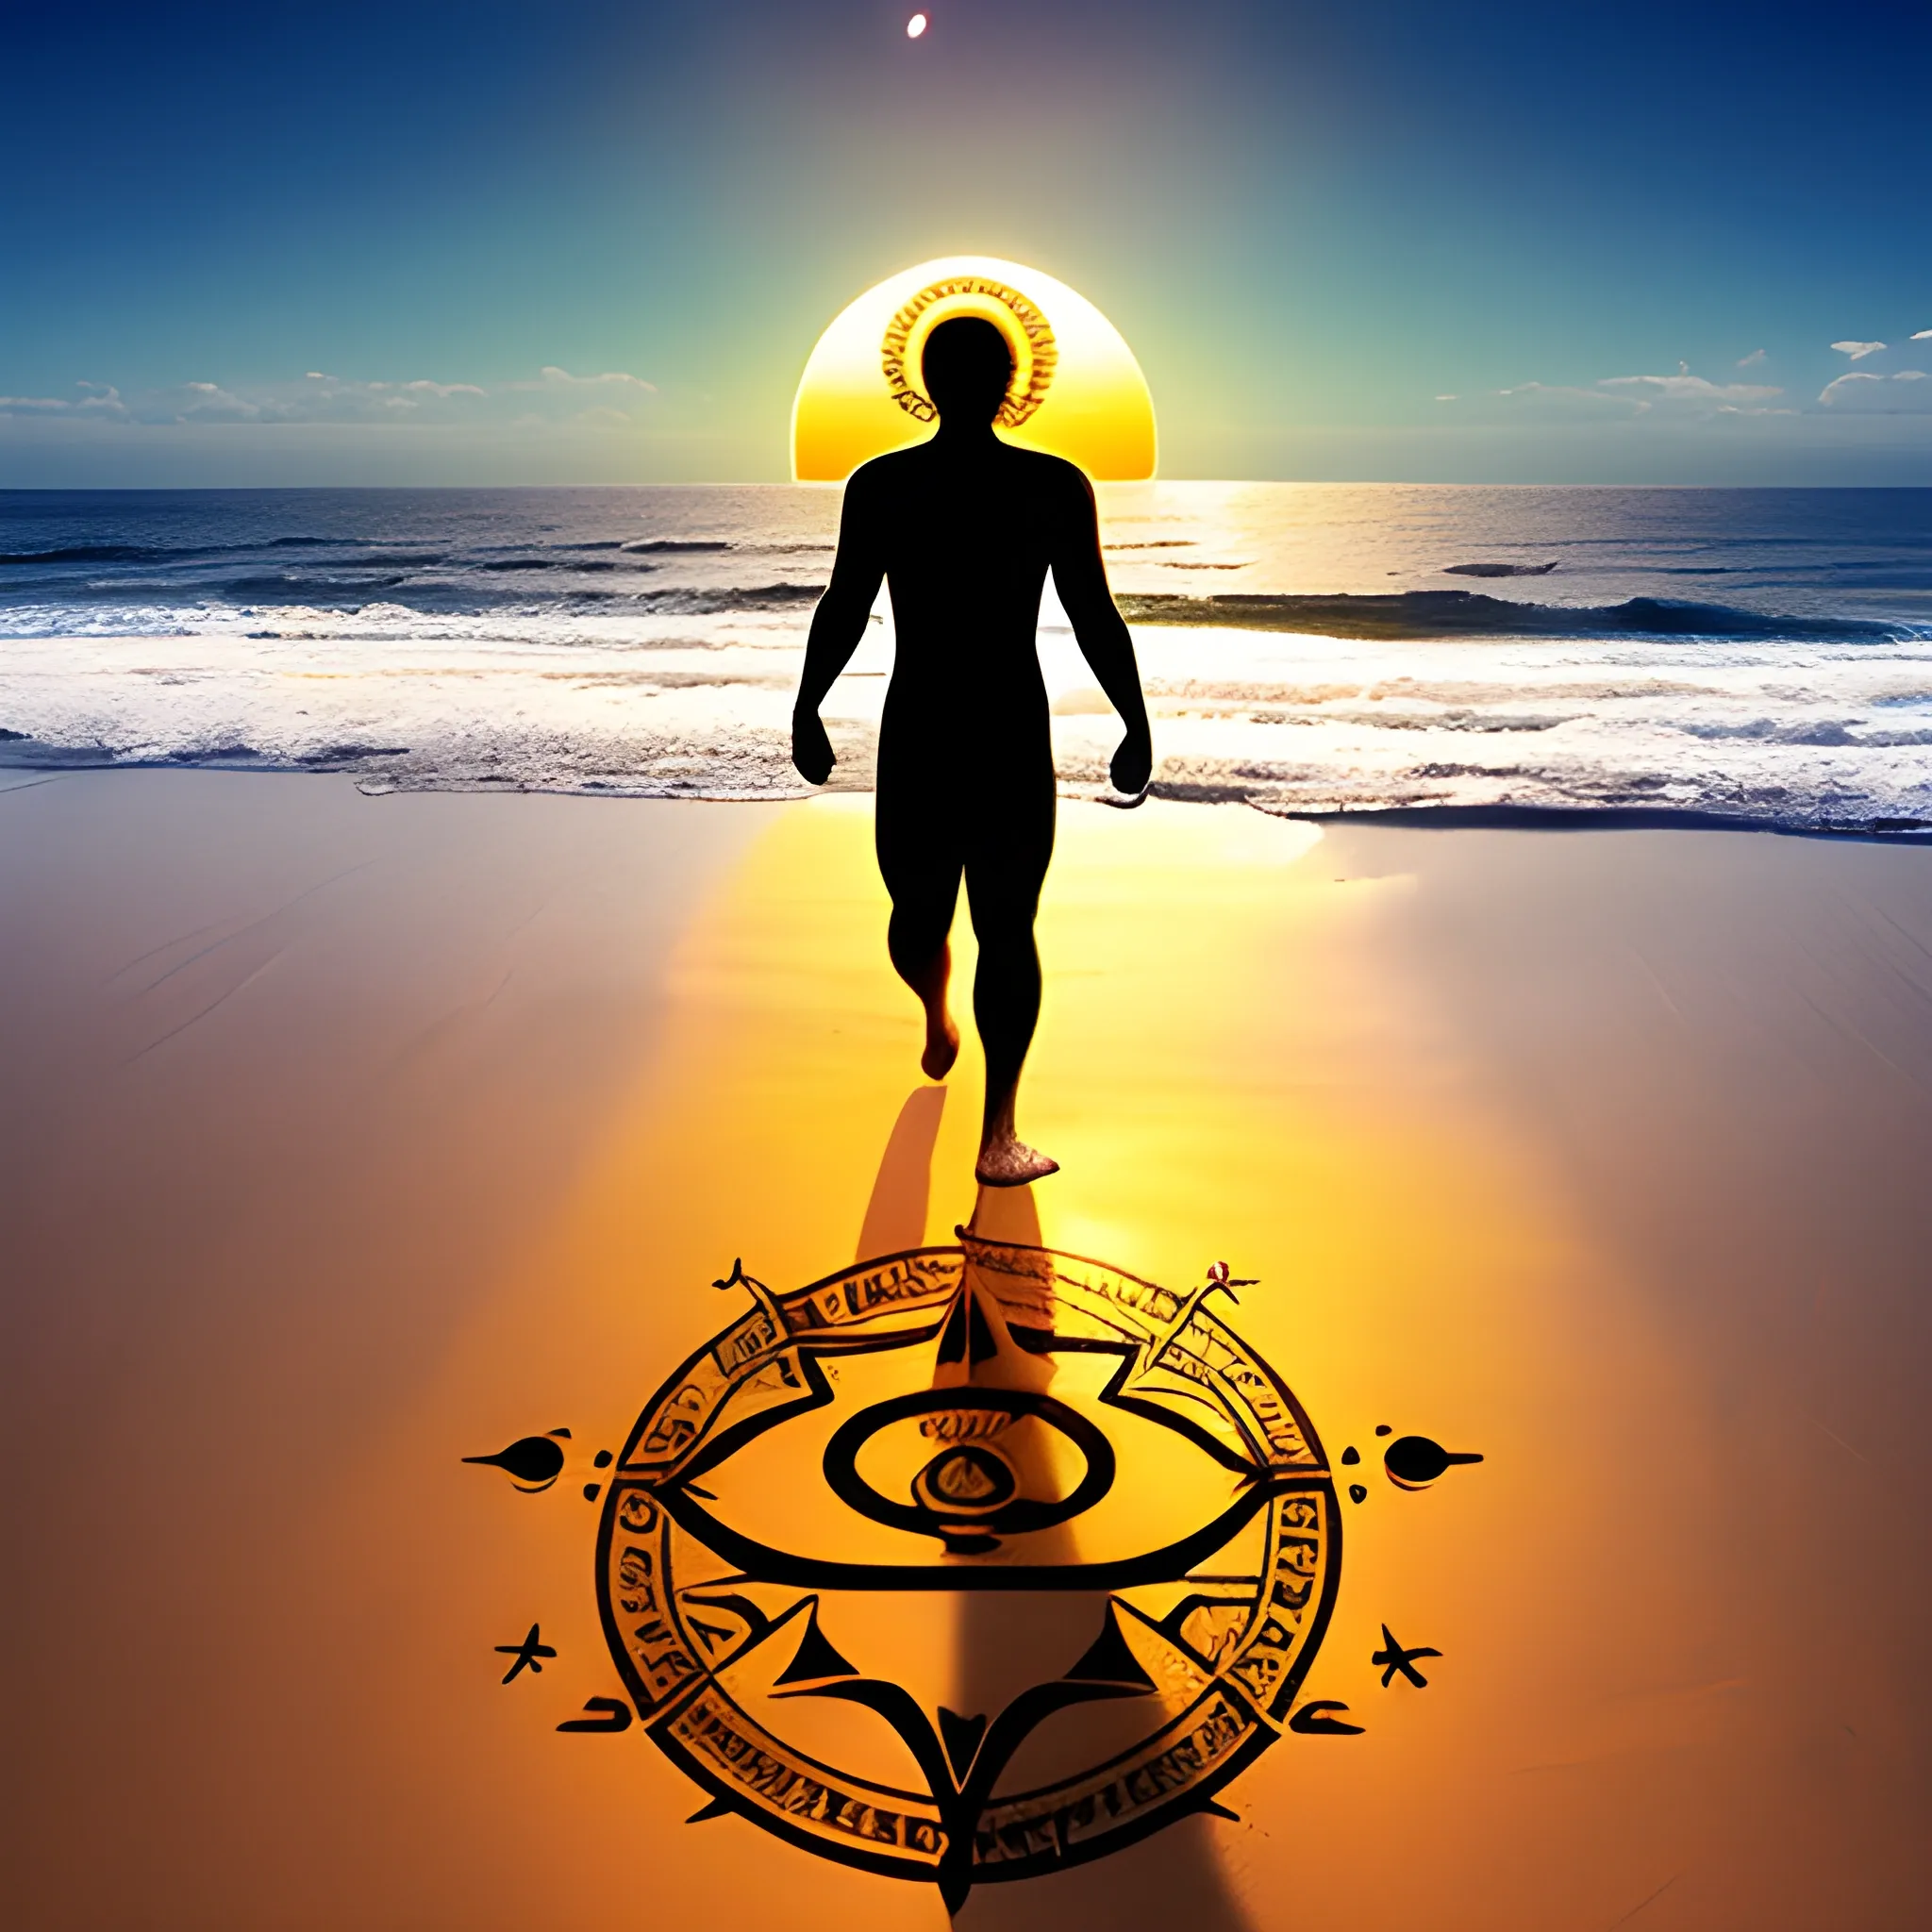 human being with the sevens chakras, beach, sunset, universe, moon, Hermes caduceus , walking to the sea, initiation, footprints in the sand


